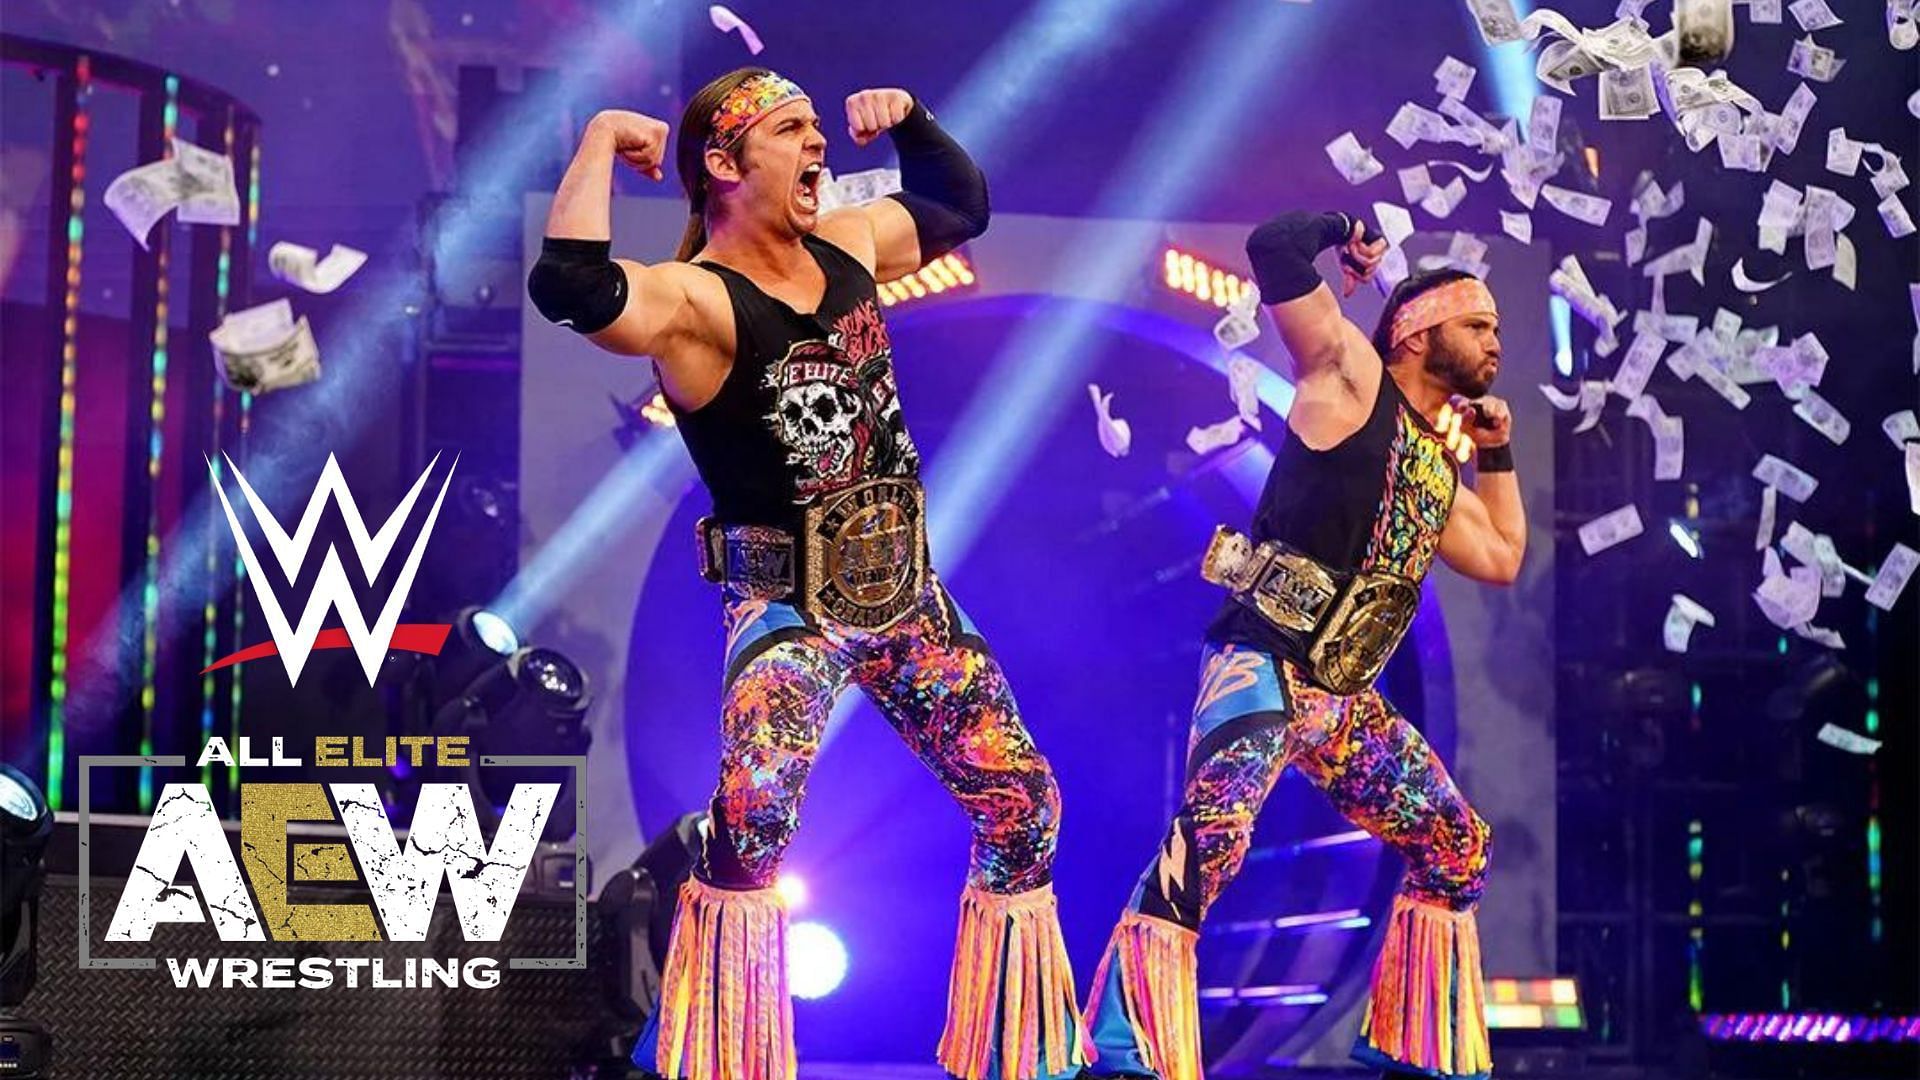 Former AEW World Tag Team Champions The Young Bucks